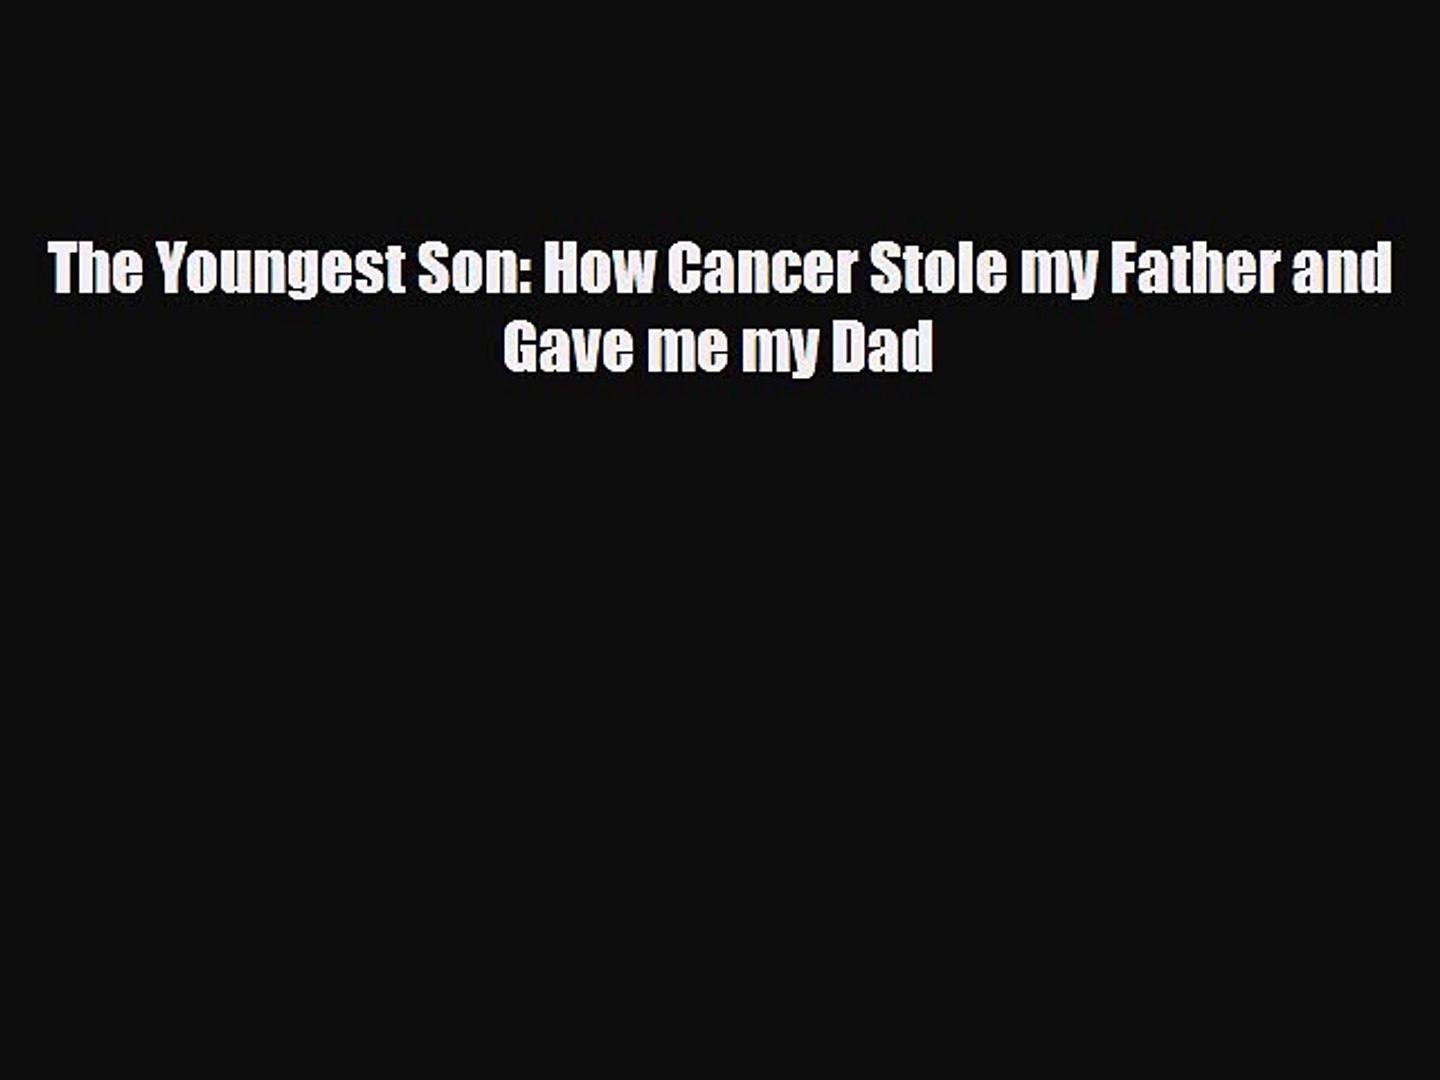 Download The Youngest Son: How Cancer Stole my Father and Gave me my Dad Book Online